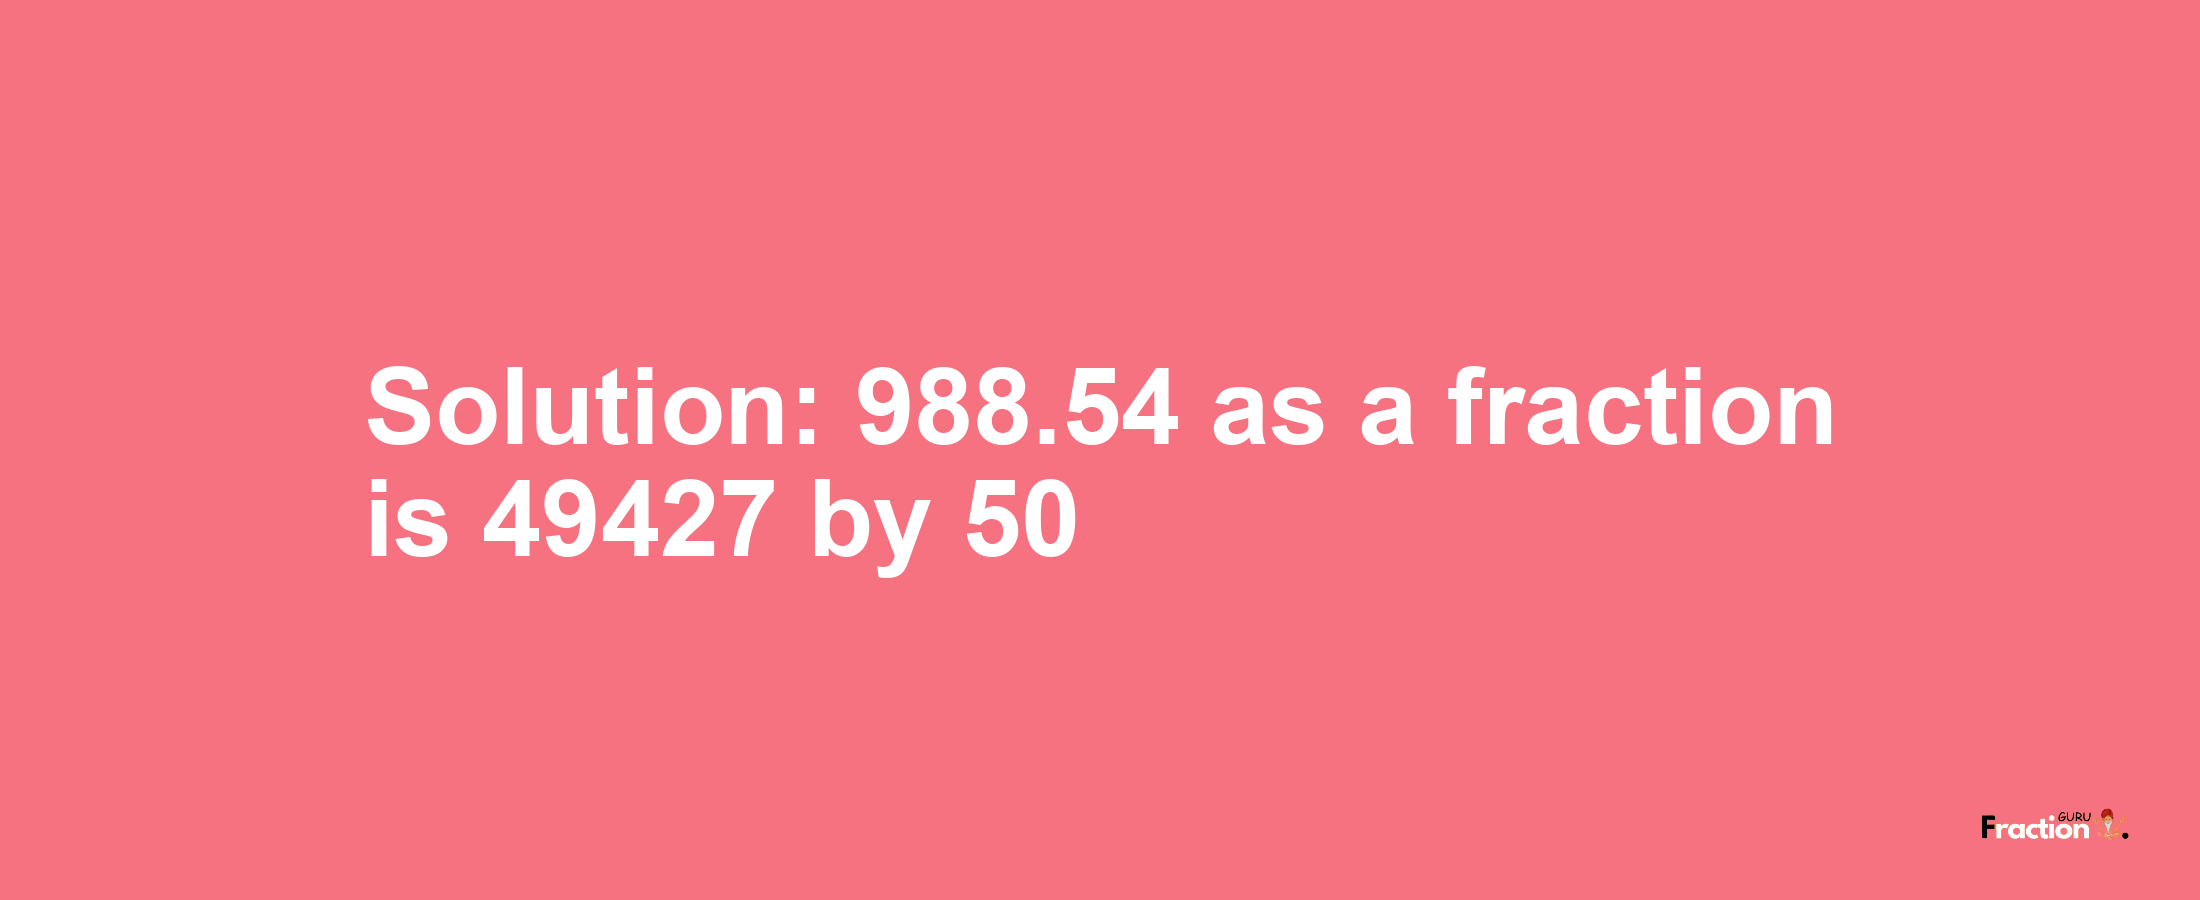 Solution:988.54 as a fraction is 49427/50